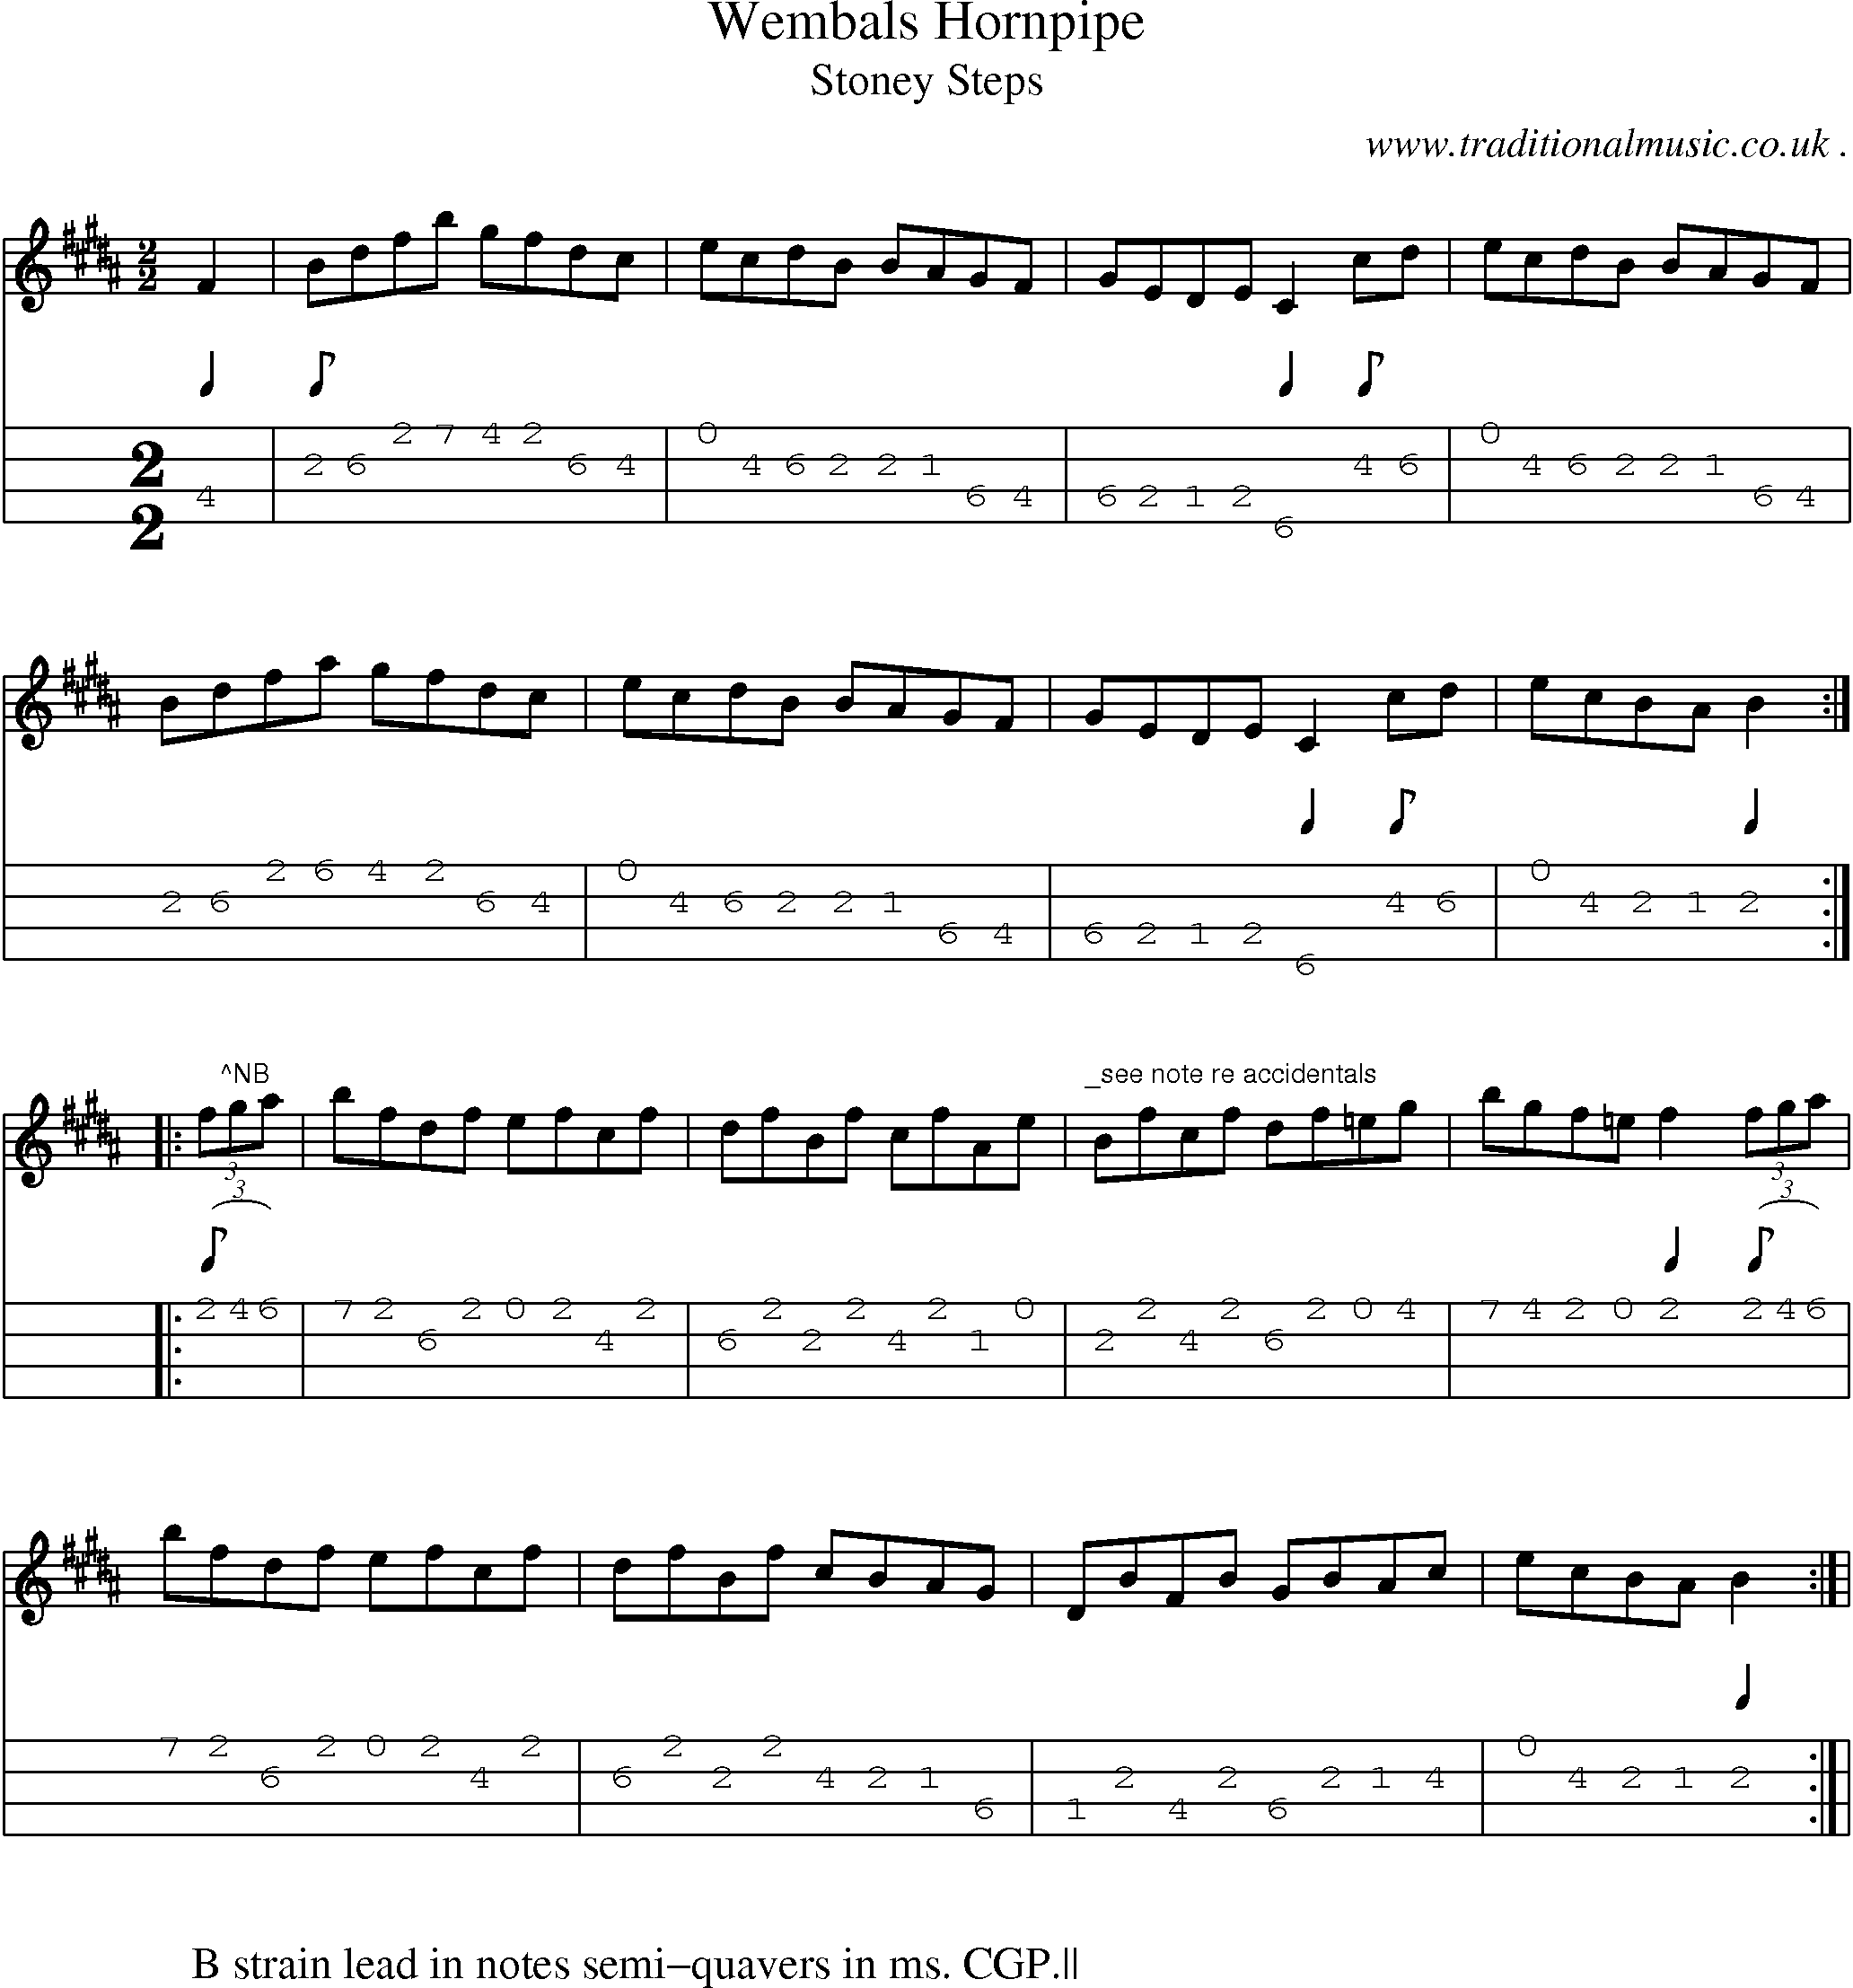 Sheet-Music and Mandolin Tabs for Wembals Hornpipe